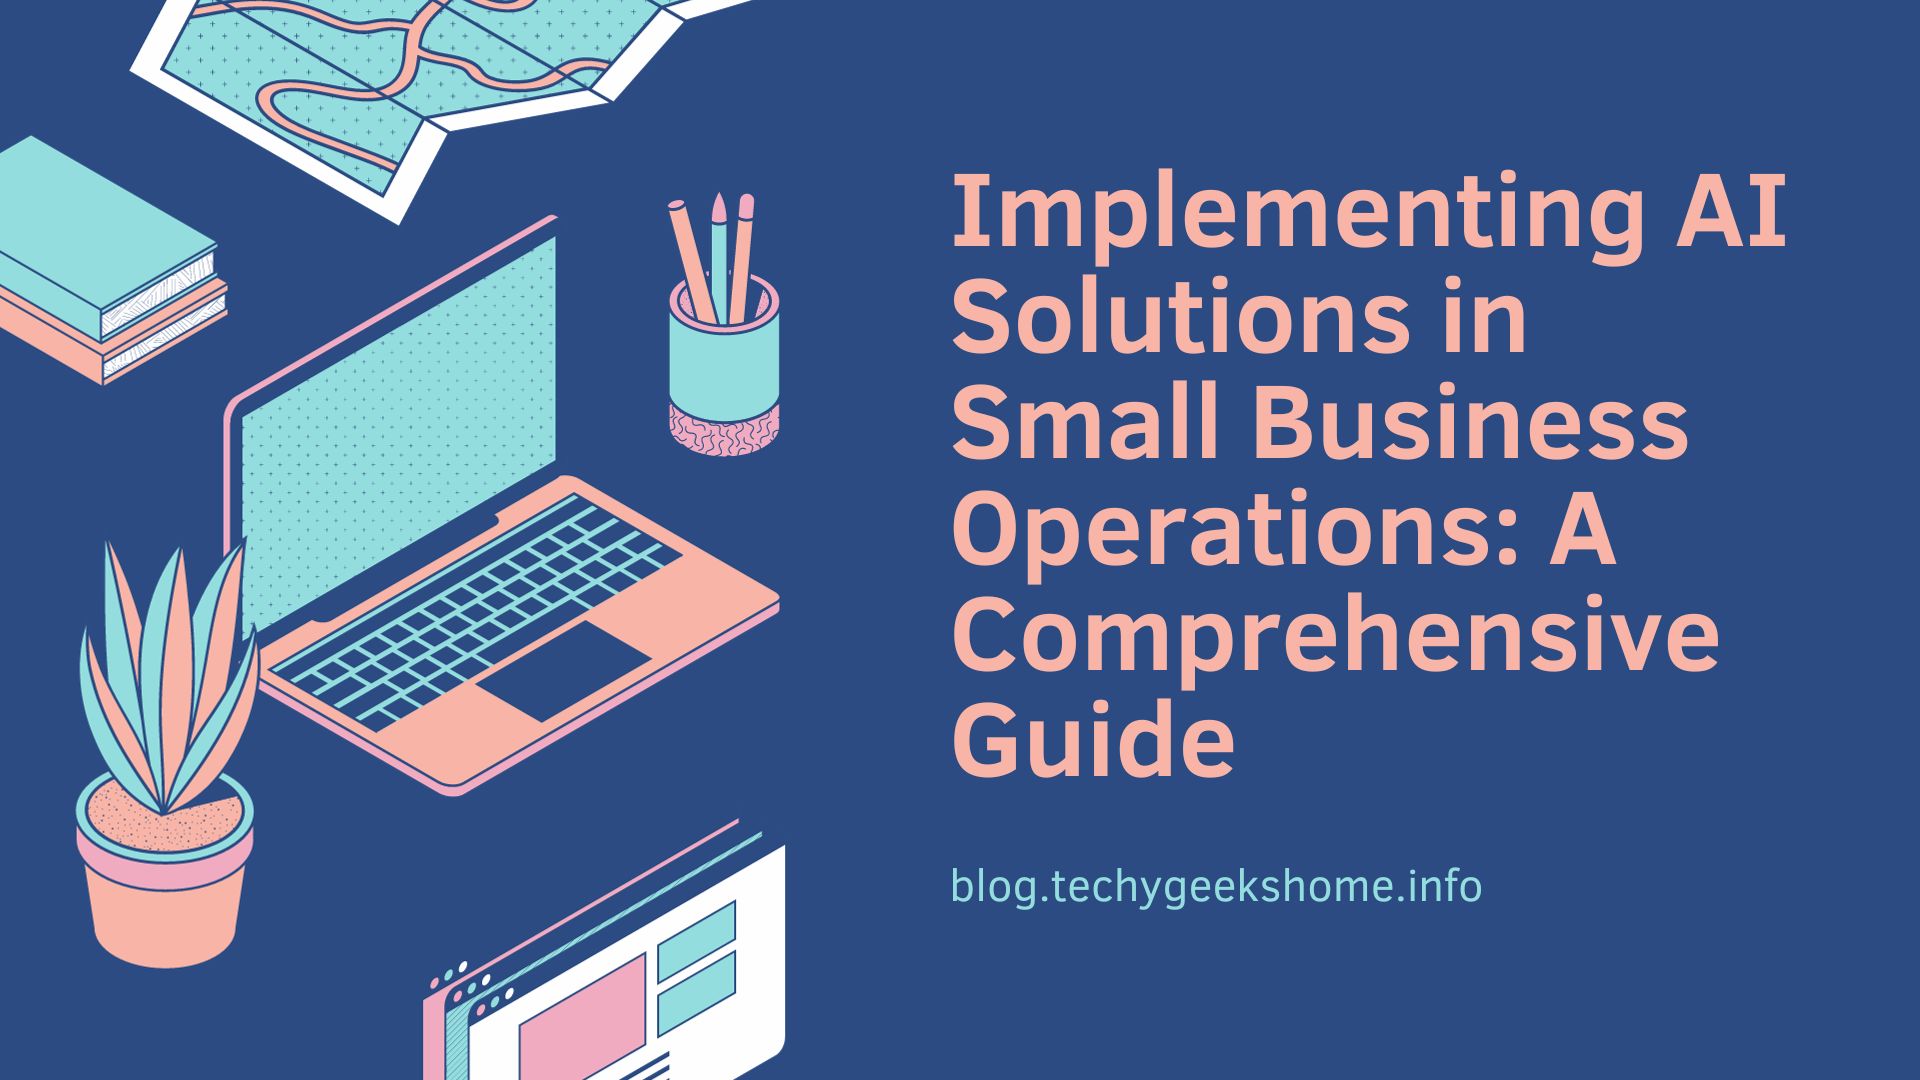 Implementing AI Solutions in Small Business Operations: A Comprehensive Guide